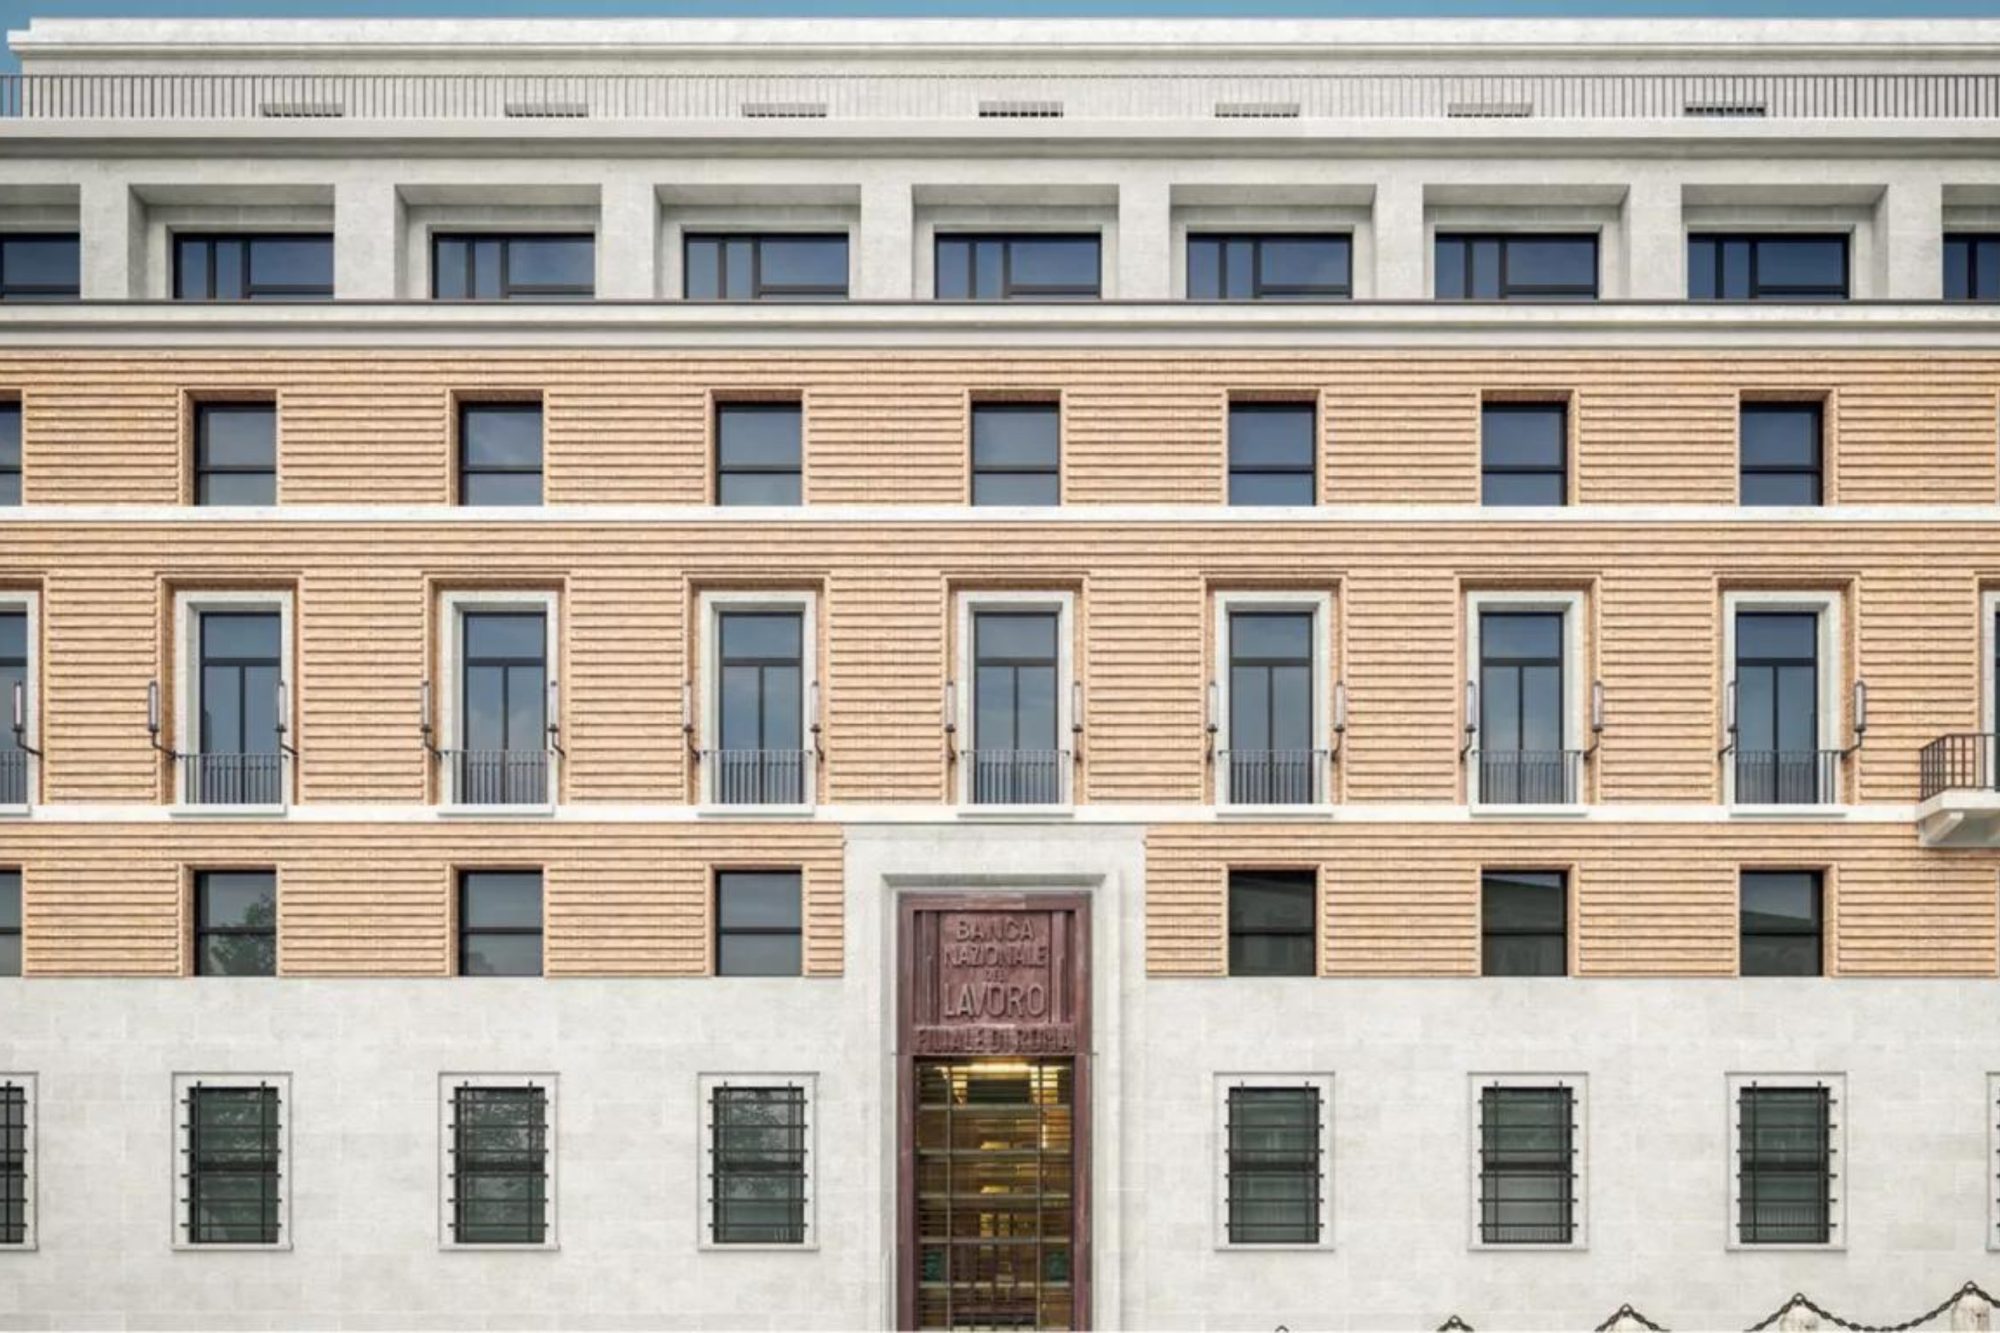 Rosewood Rome’s grand unveiling is slated for 2025